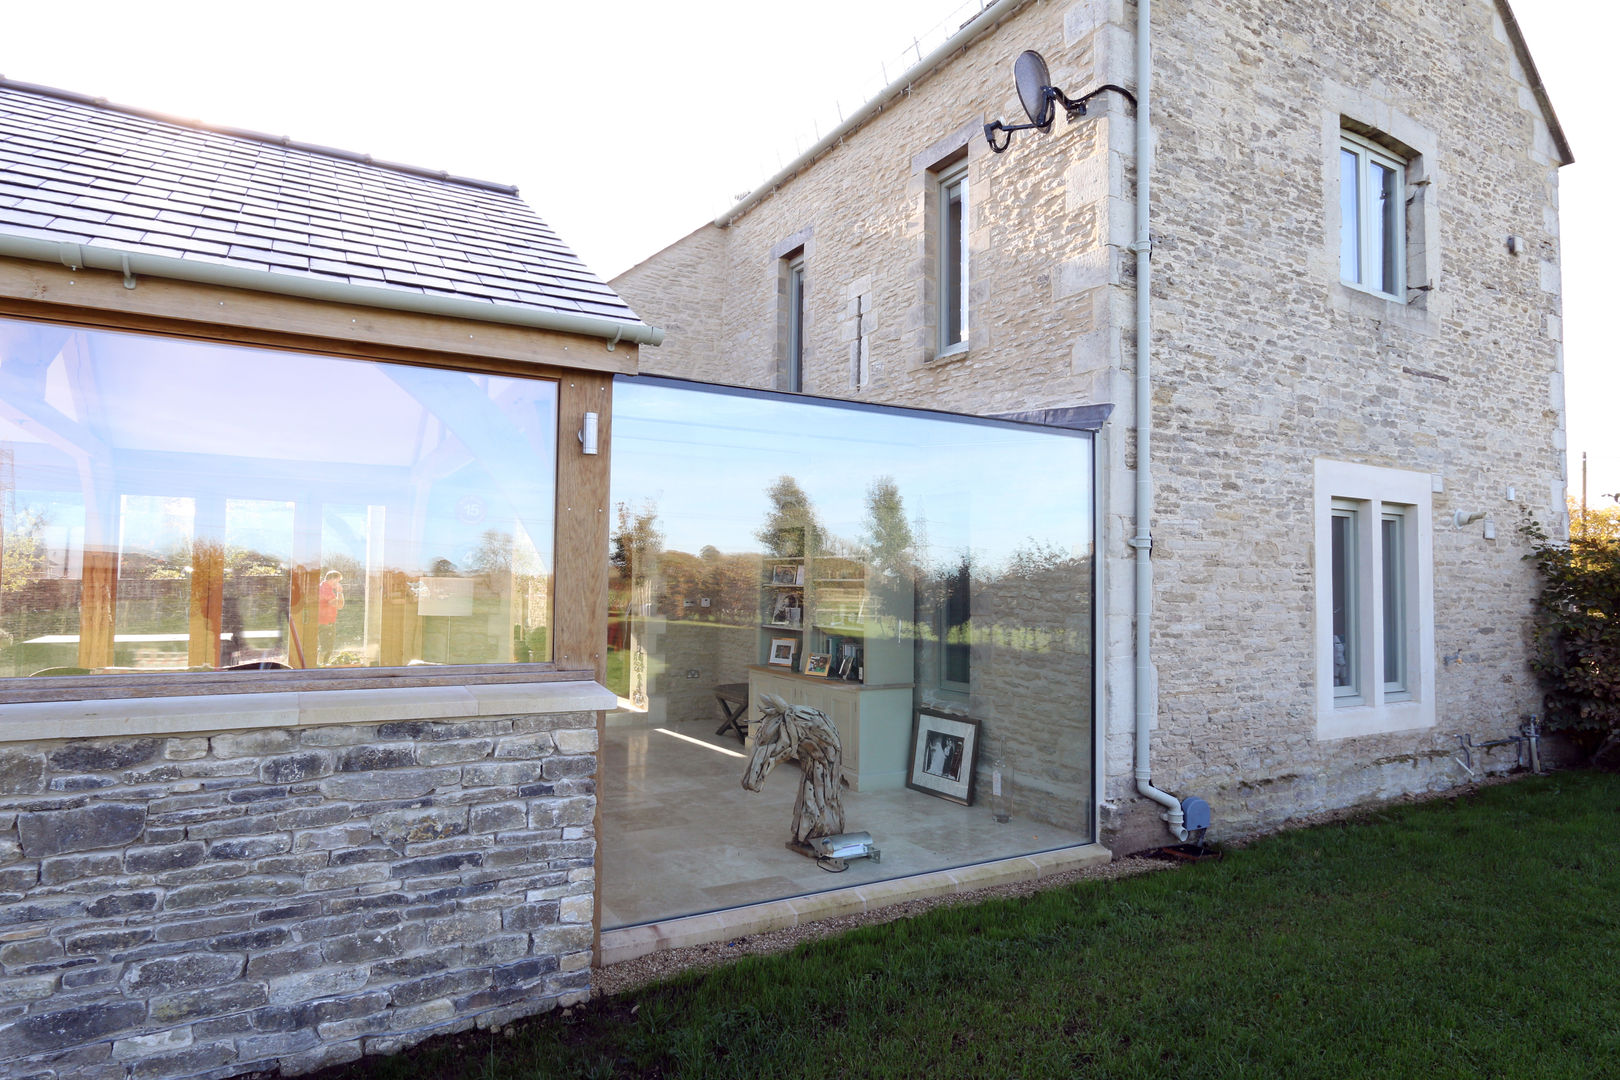 Green Barn homify Jardines de invierno rurales Green Barn,Project,Structural Glass,Cottage,Conservatory